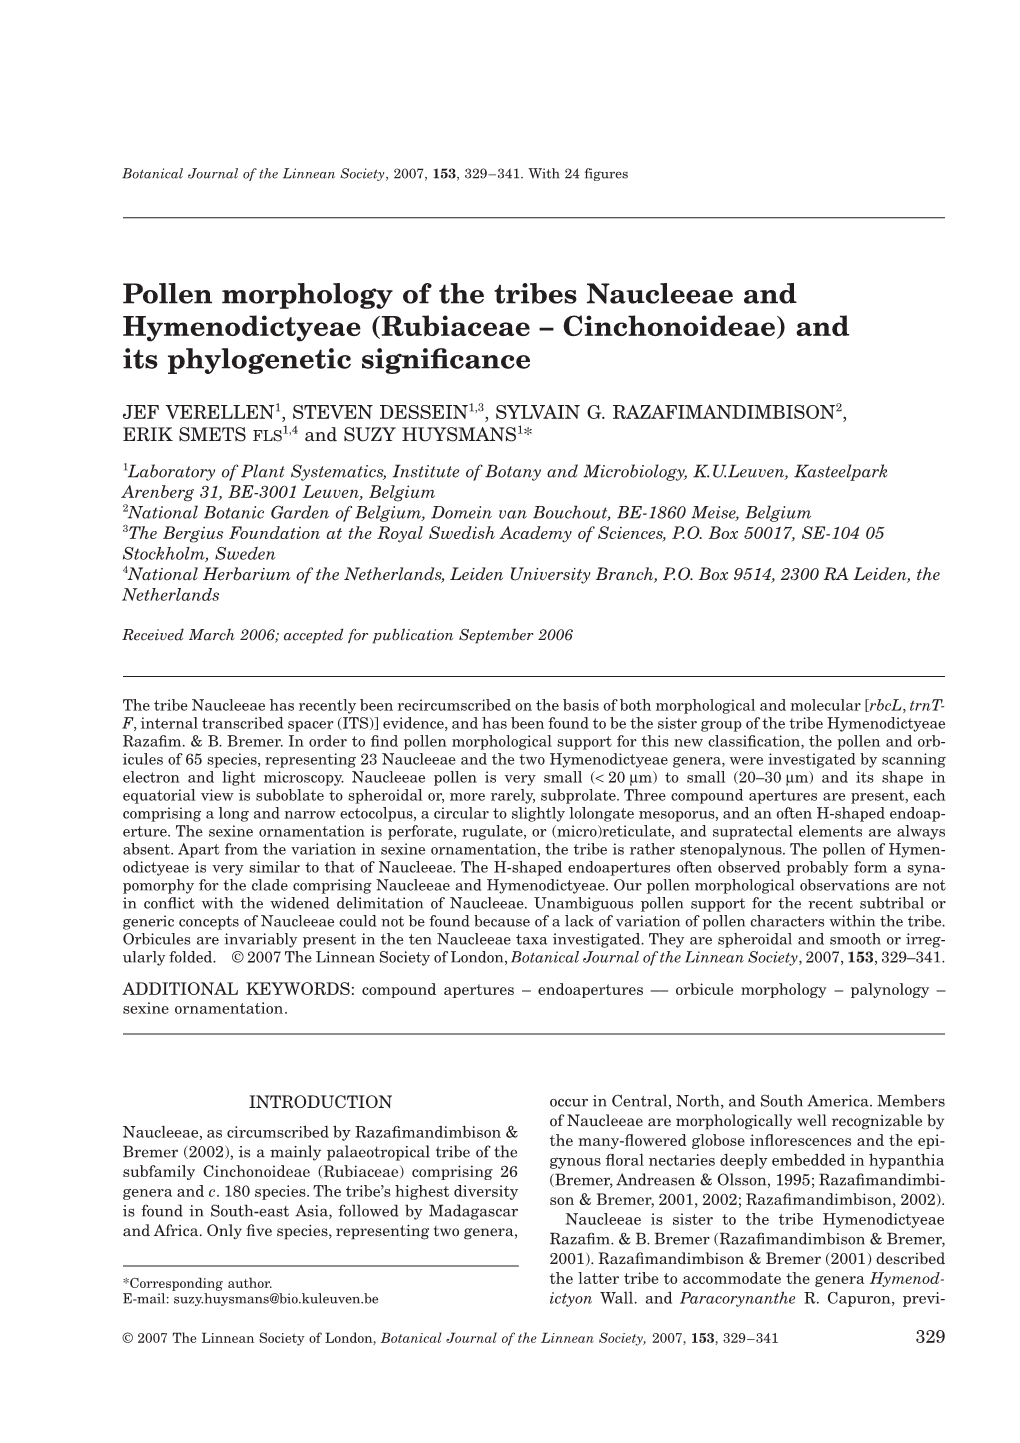 Pollen Morphology of the Tribes Naucleeae and Hymenodictyeae (Rubiaceae – Cinchonoideae) and Its Phylogenetic Signiﬁcance